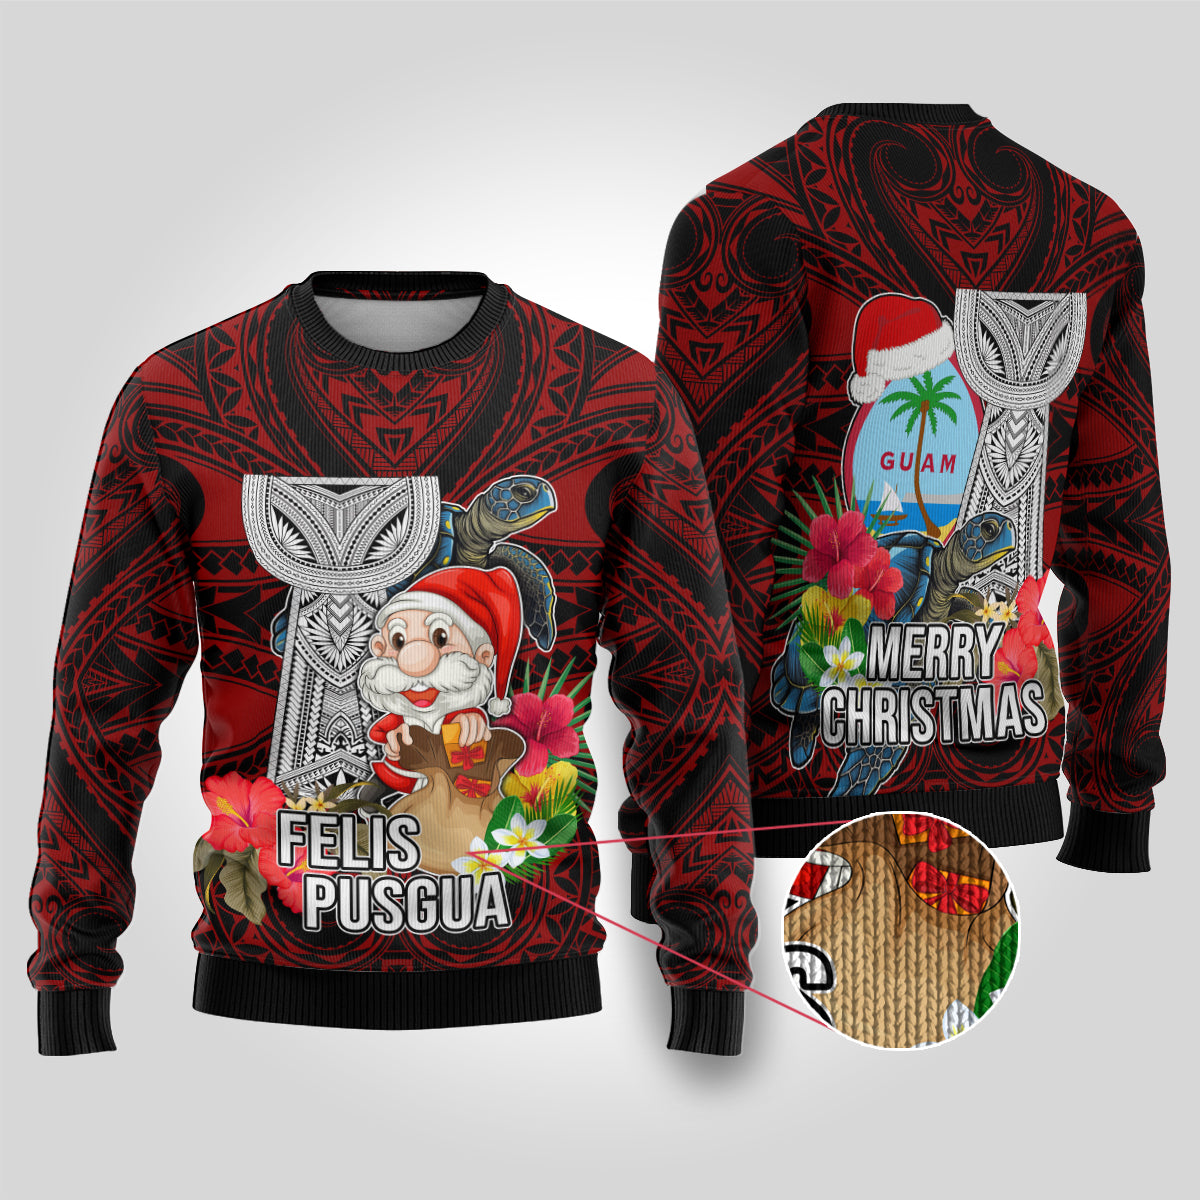 Guam Christmas Ugly Christmas Sweater Santa Gift Latte Stone and Sea Turle Mix Hibiscus Chamorro Red Style LT03